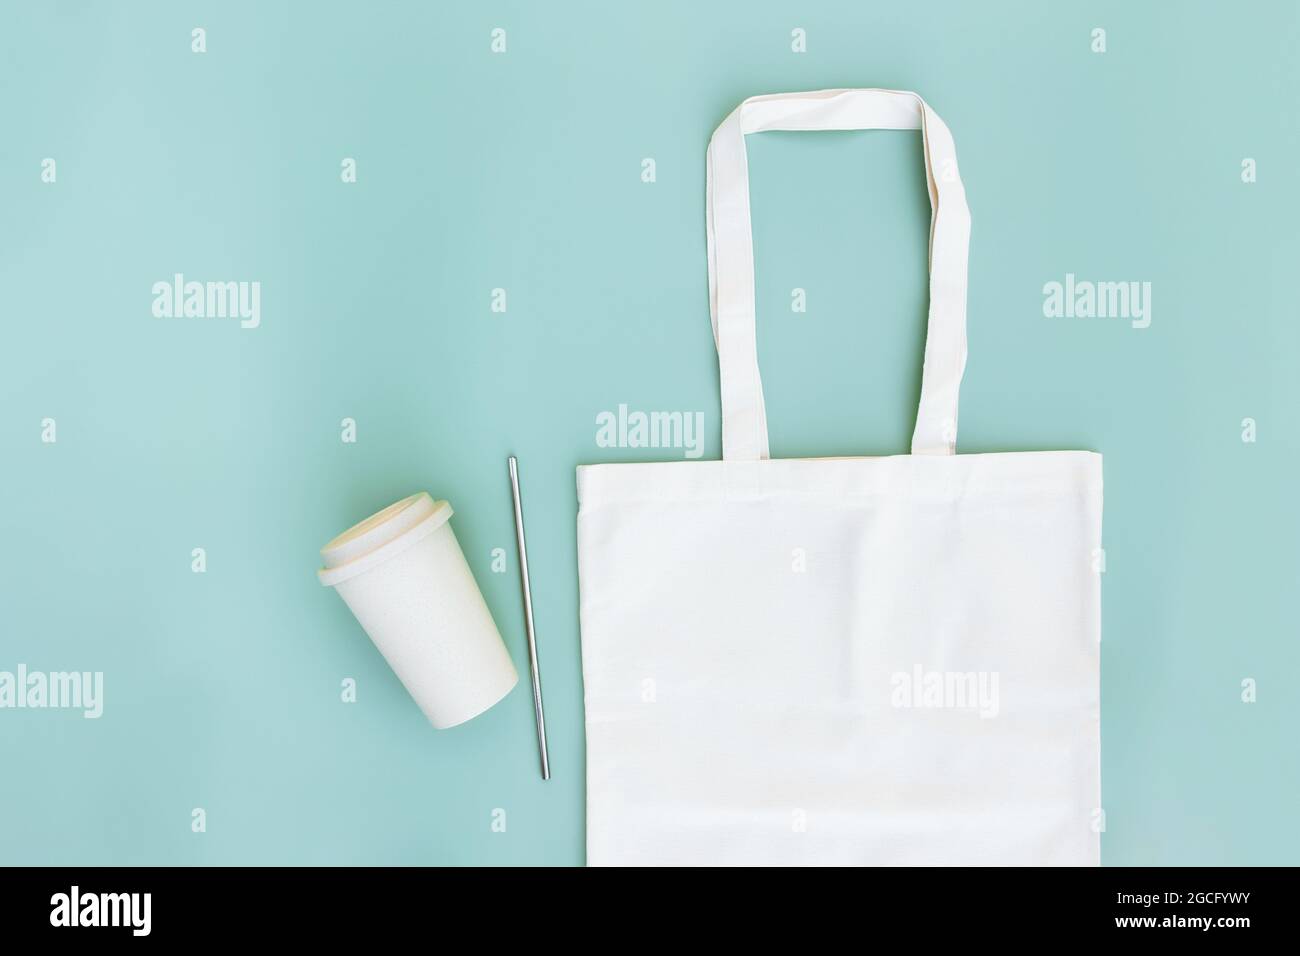 https://c8.alamy.com/comp/2GCFYWY/eco-white-craft-paper-bag-metal-drink-straw-coffee-cup-on-green-background-flat-lay-with-copy-space-empty-advertising-area-mock-up-for-delivery-ser-2GCFYWY.jpg